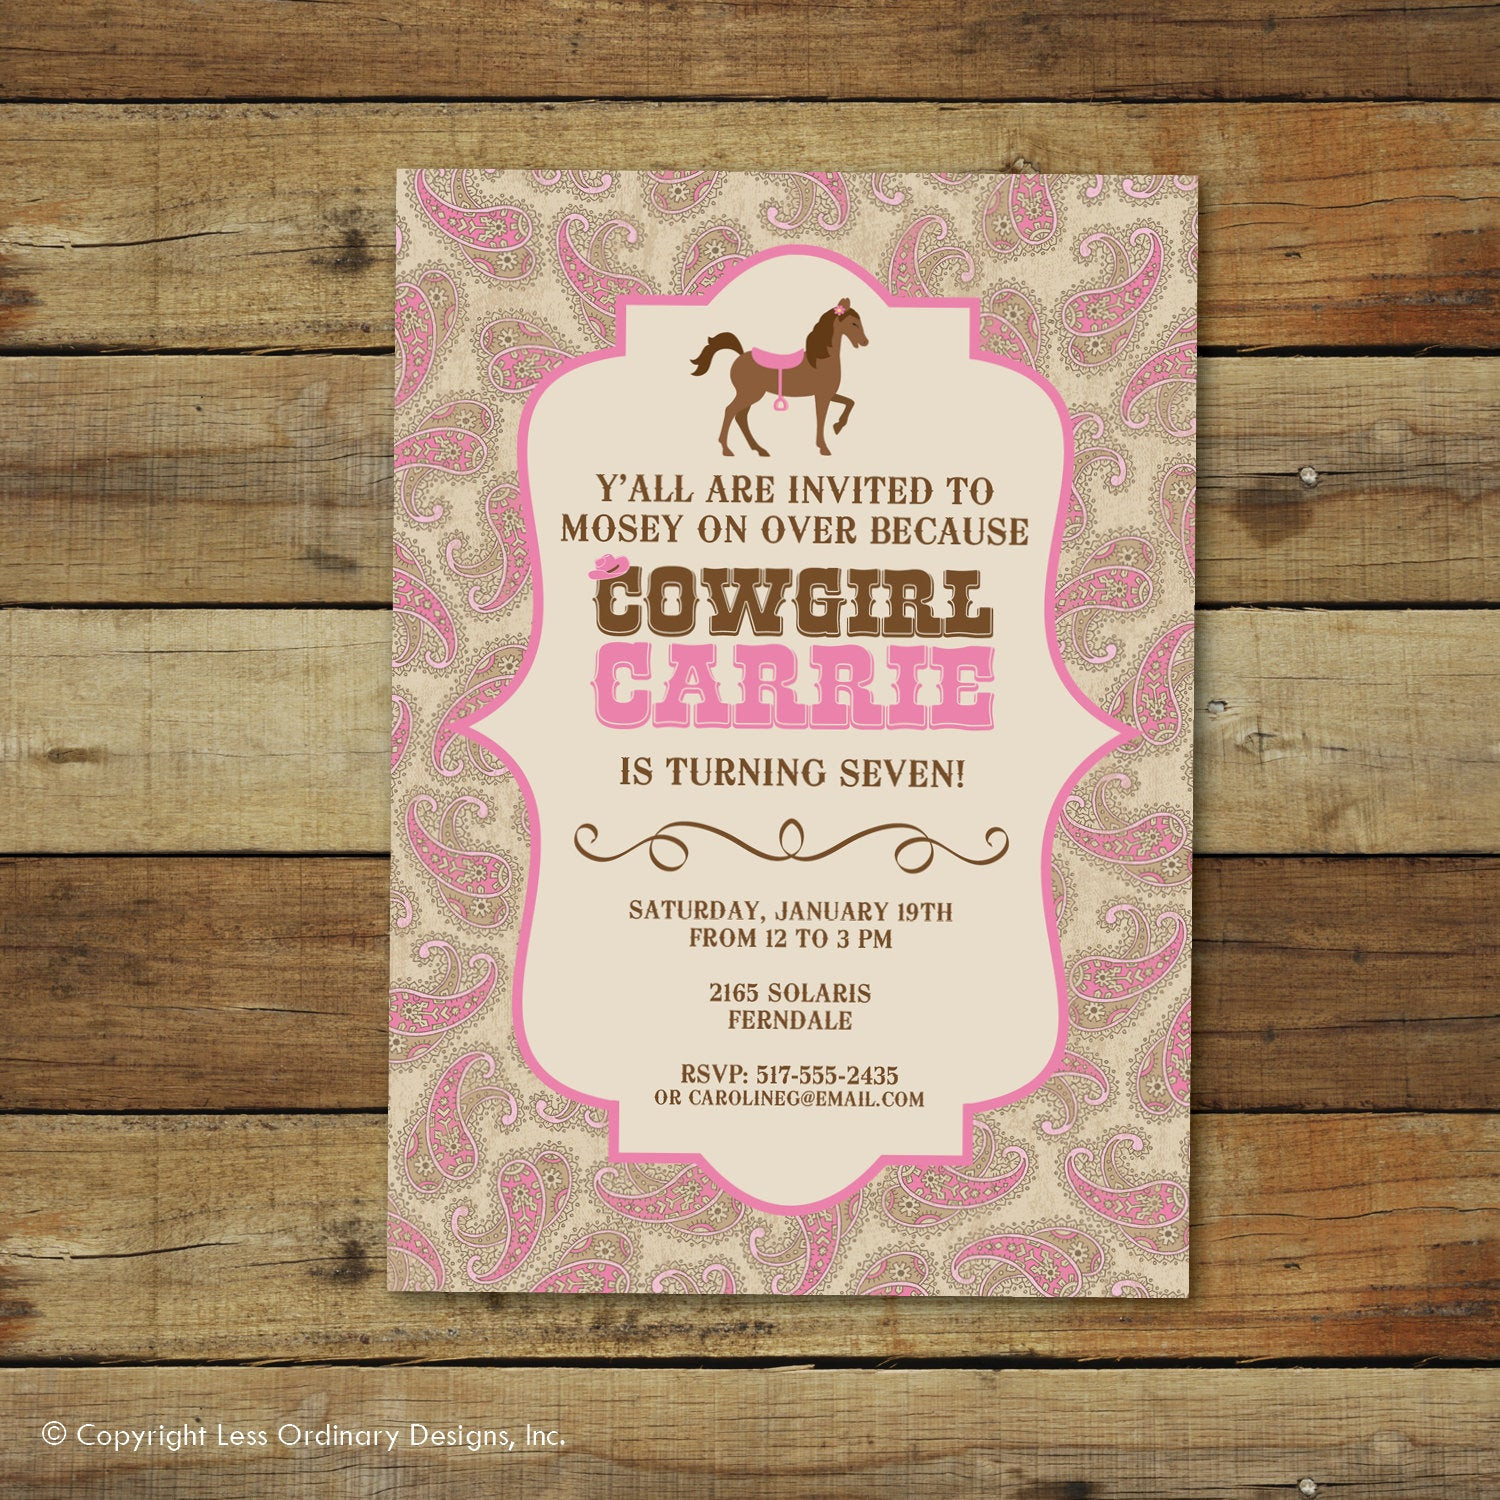 Cowgirl Birthday Party Invitations
 Cowgirl birthday invitation cowgirl birthday party pink